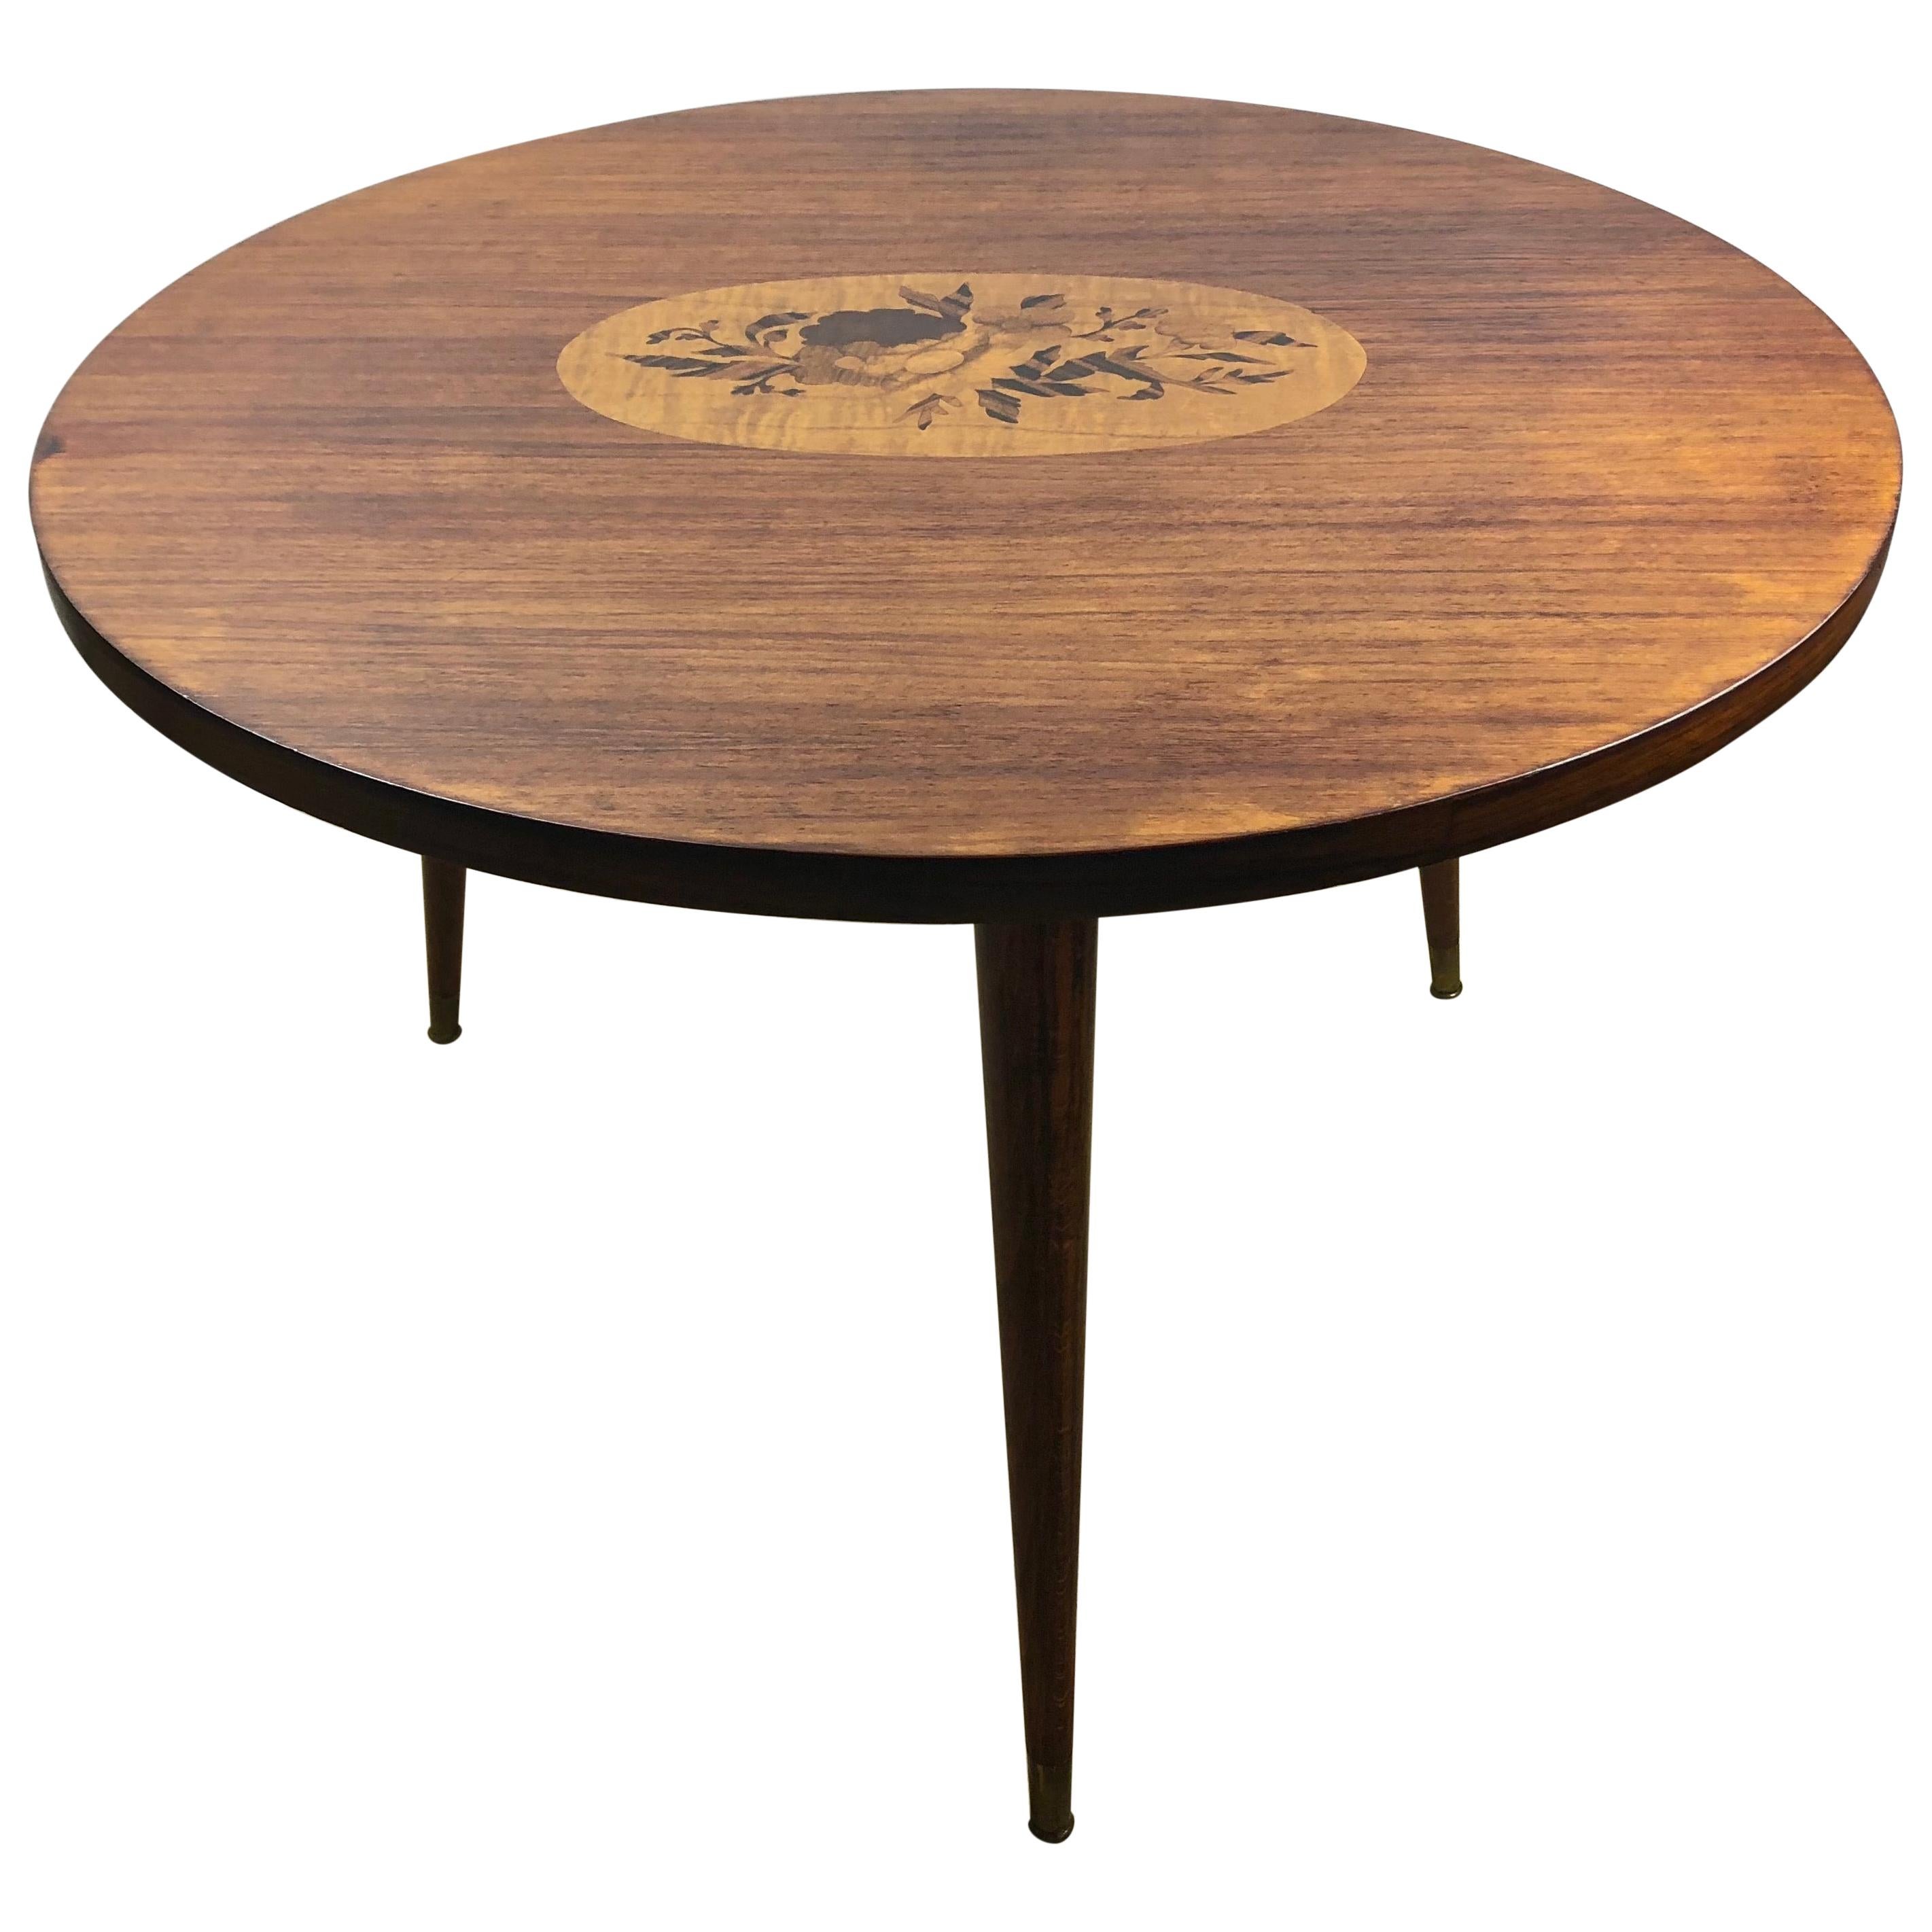 French Art Deco Style Round Wooden Cocktail or Side Table with Marquetry Center